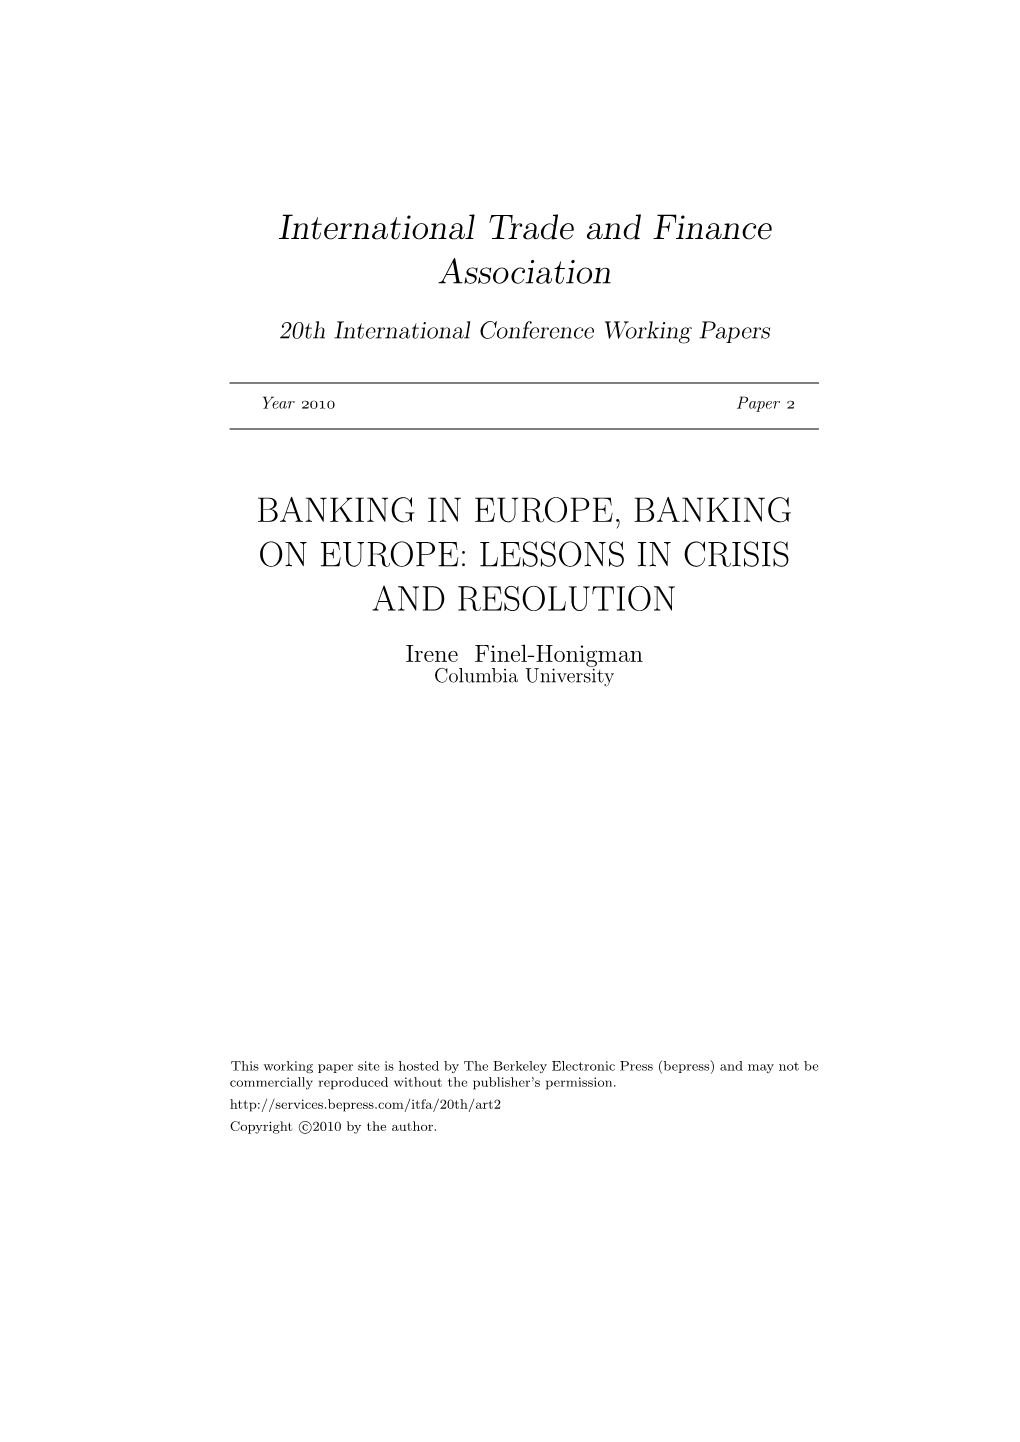 LESSONS in CRISIS and RESOLUTION Irene Finel-Honigman Columbia University